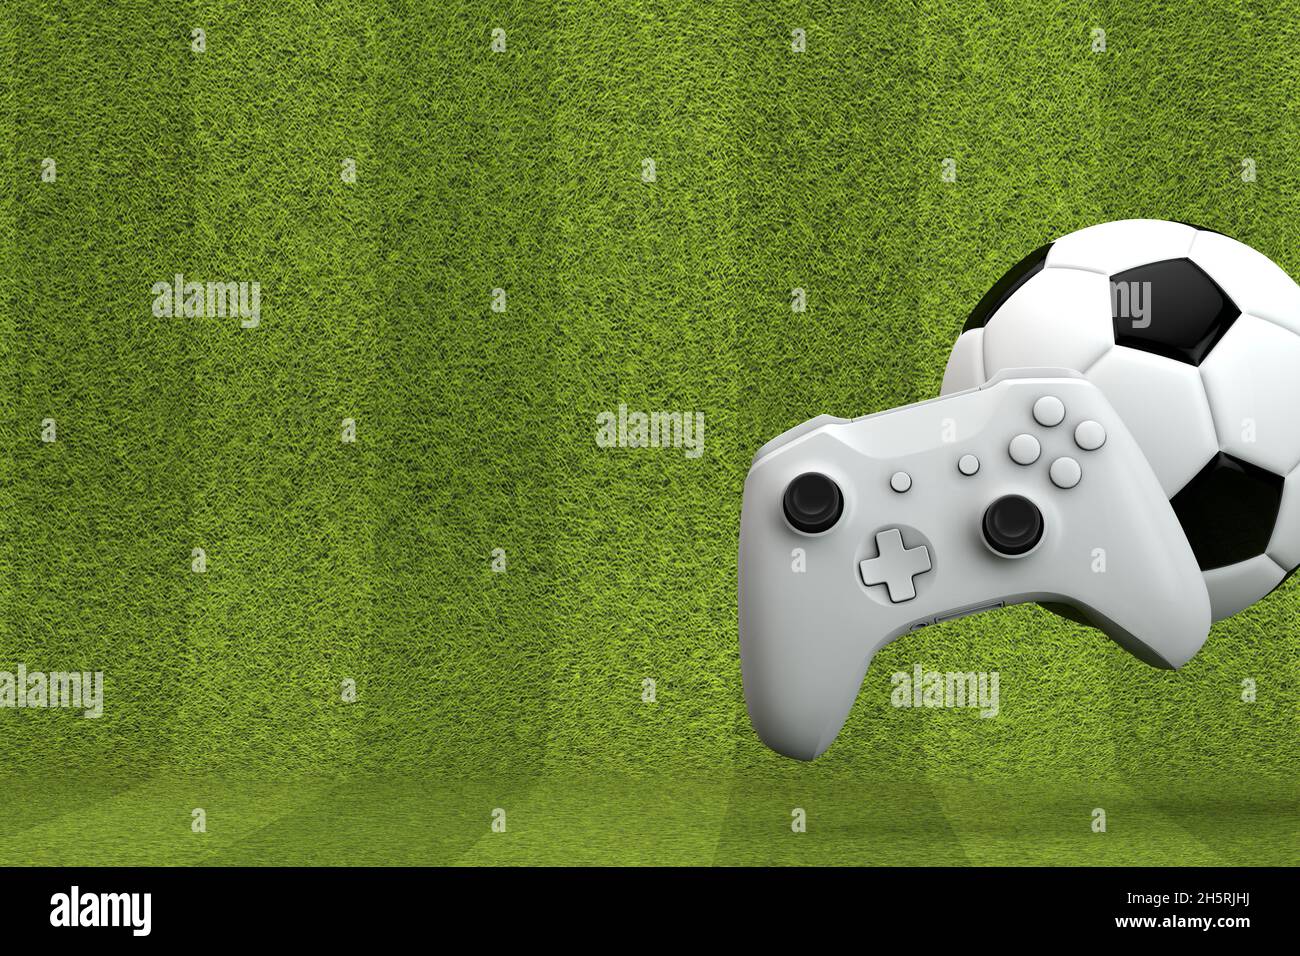 Soccer gaming background. Video game controller with a traditional football  ball and grass pitch. 3D Rendering Stock Photo - Alamy